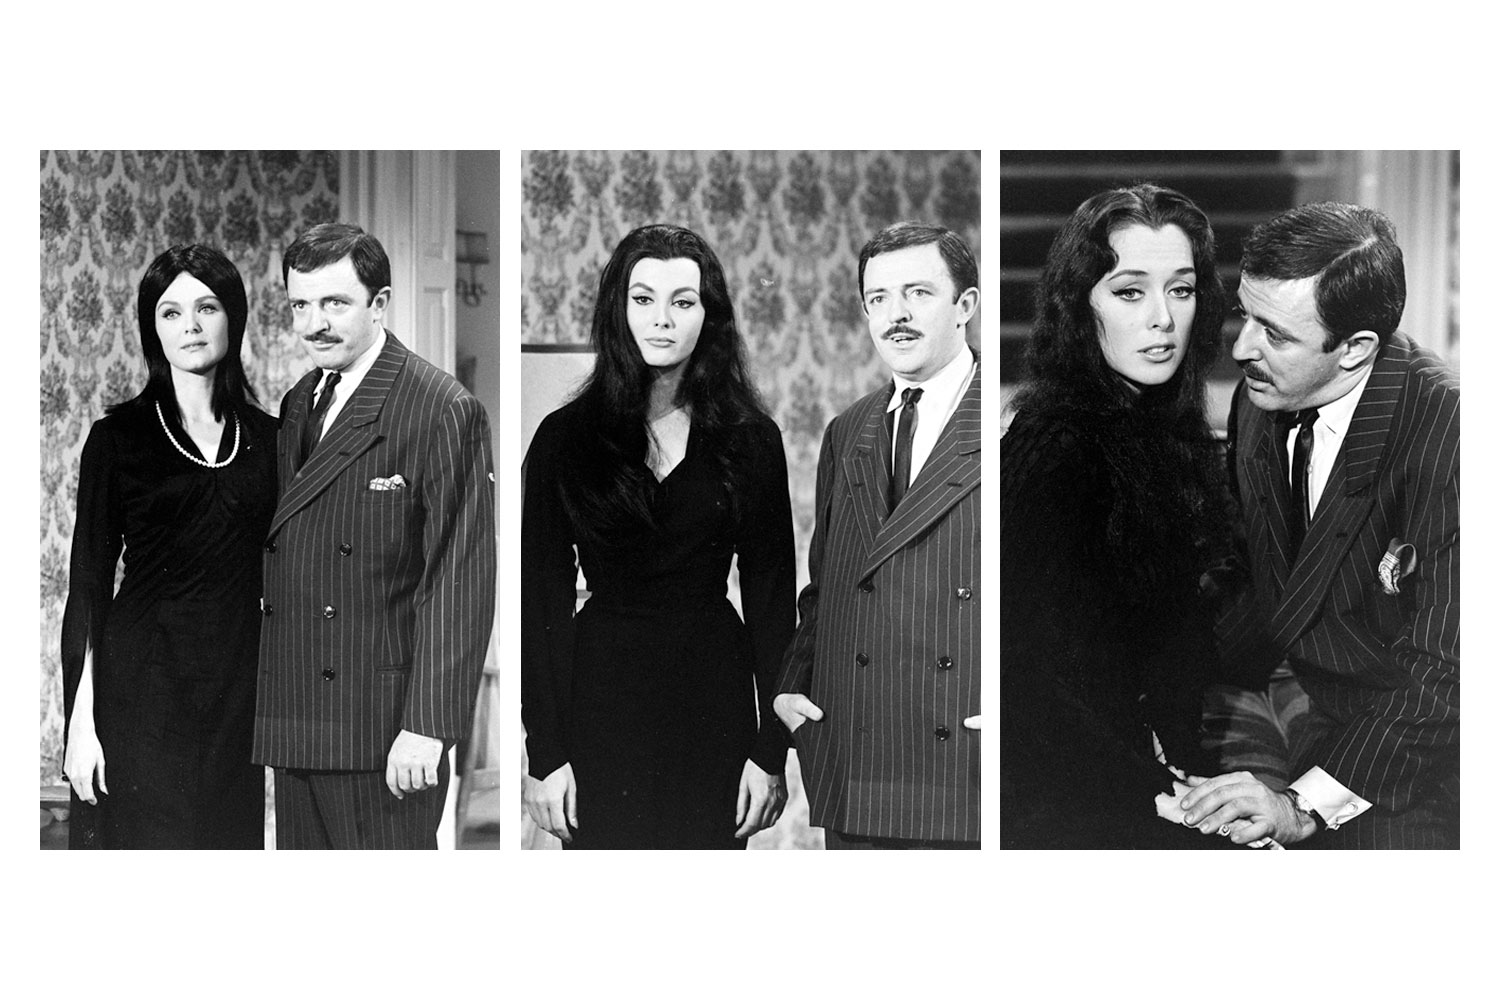 John Astin (Gomez) with various actresses auditioning for the role of Morticia Addams, 1964.